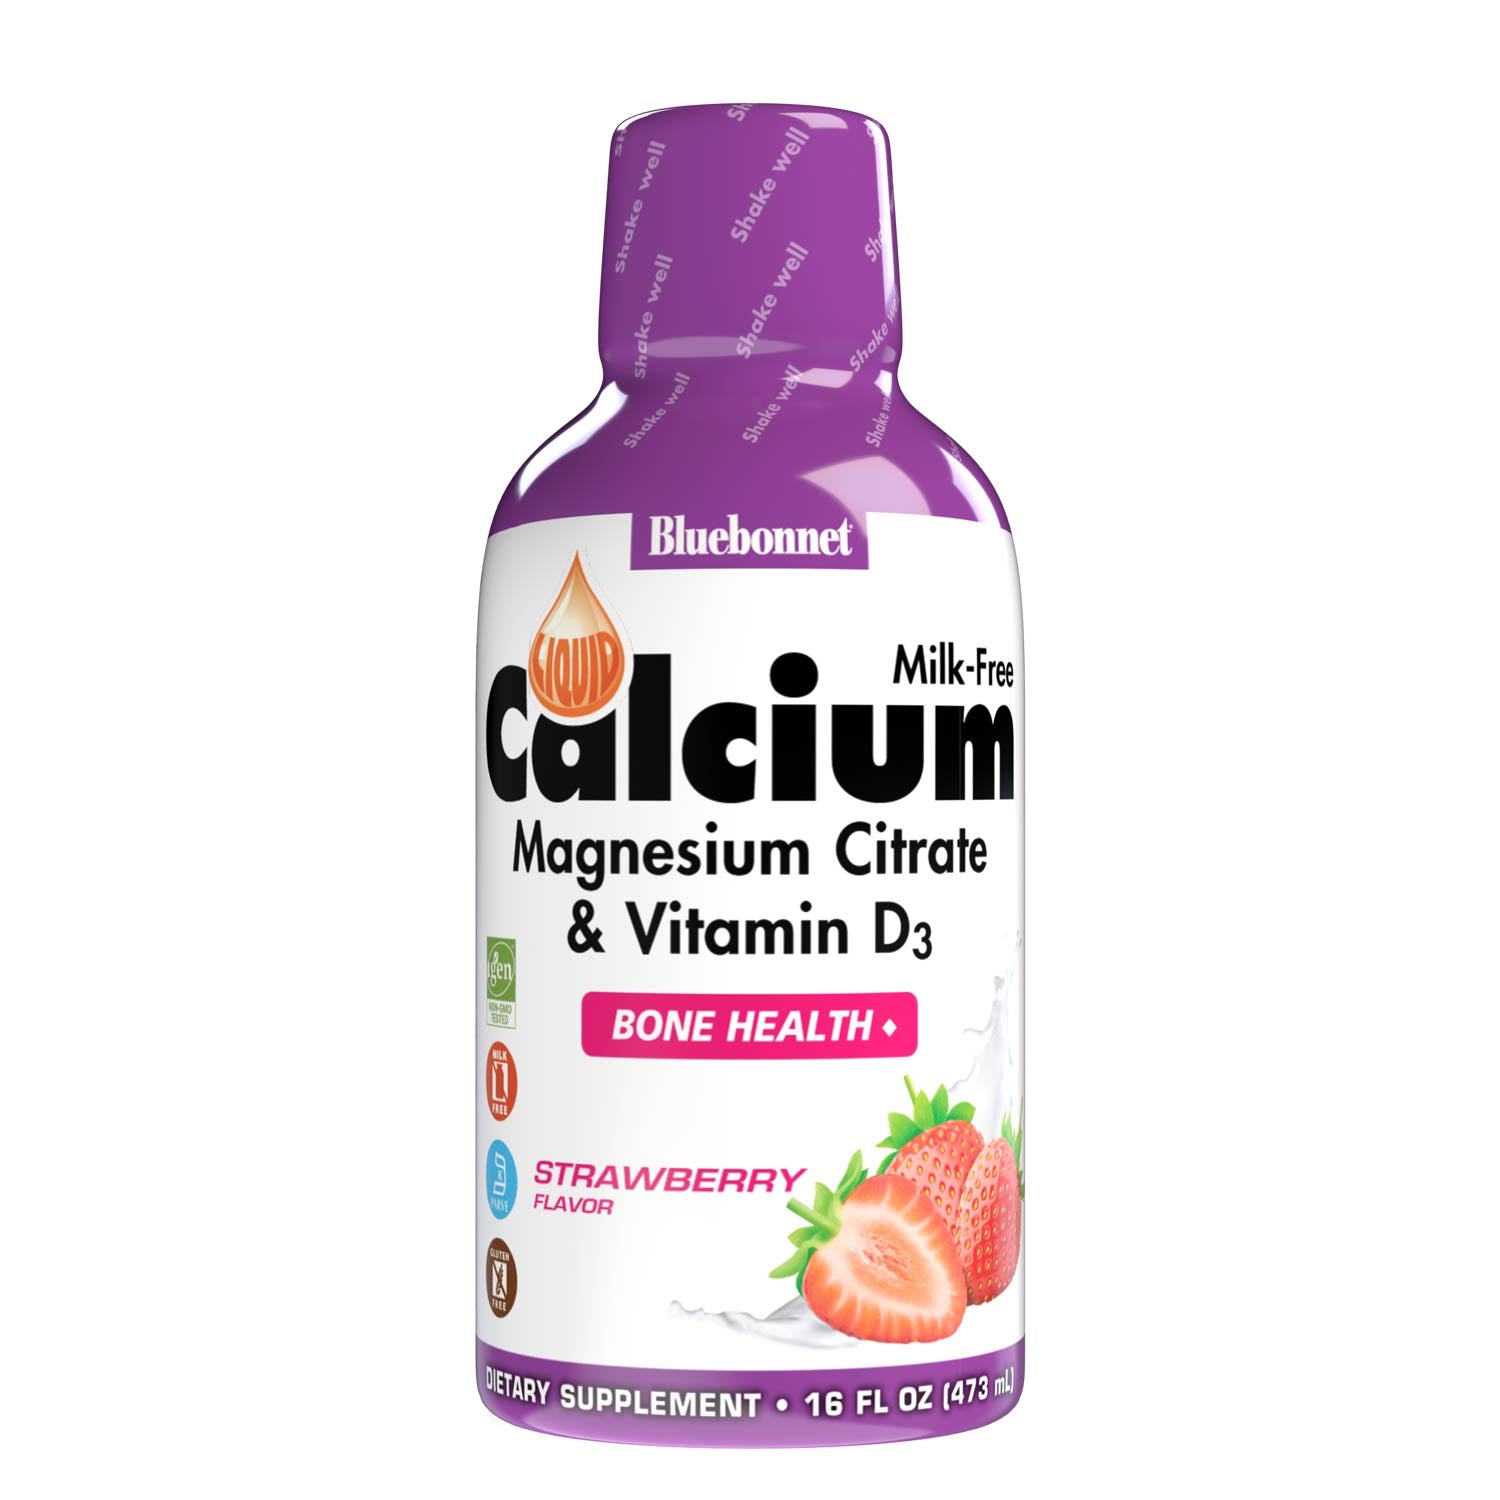 Bluebonnet's Liquid Calcium Magnesium Citrate with Vitamin D3 are formulated with calcium in a chelate of calcium citrate, as well as magnesium in a chelate of magnesium citrate and magnesium aspartate in a delicious strawberry flavor. Plus, this formula are formulated with vitamin D3 (cholecalciferol) from lanolin for strong healthy bones. #size_16 fl oz